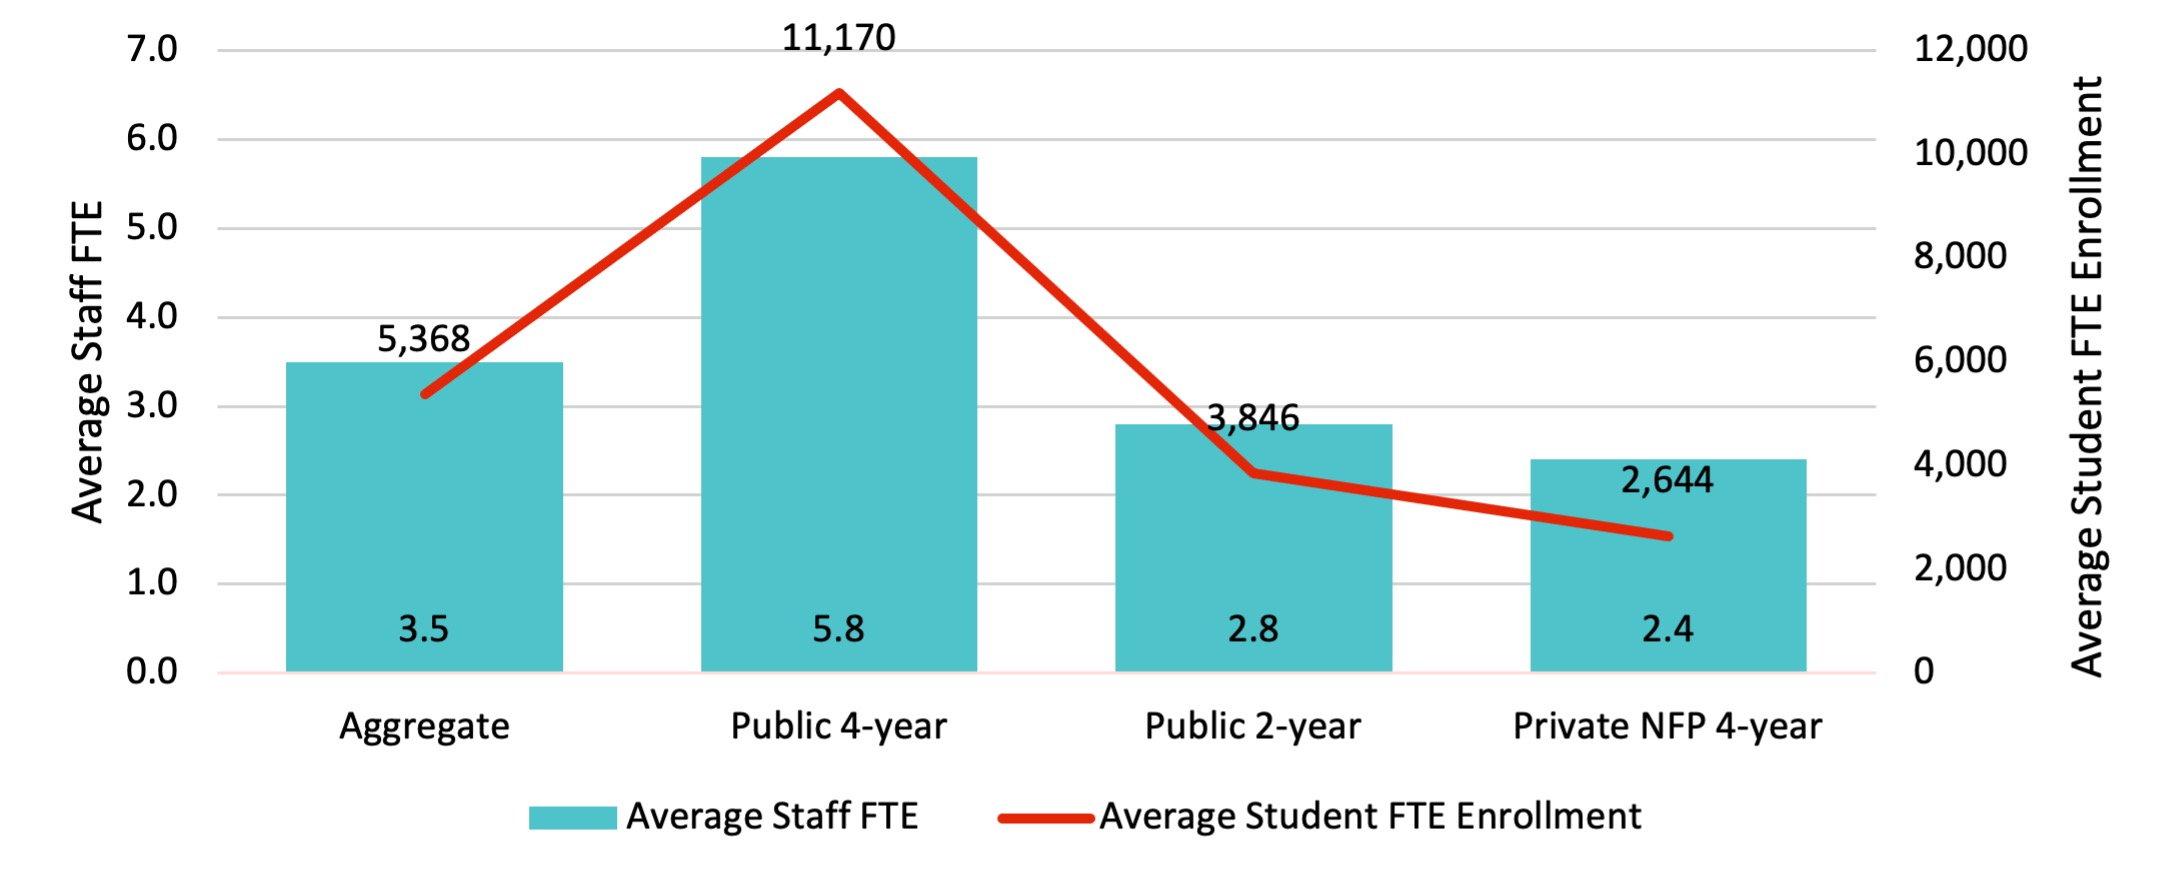 Chart 2. Relationship between IR Office Staff FTE and Student FTE Enrollment